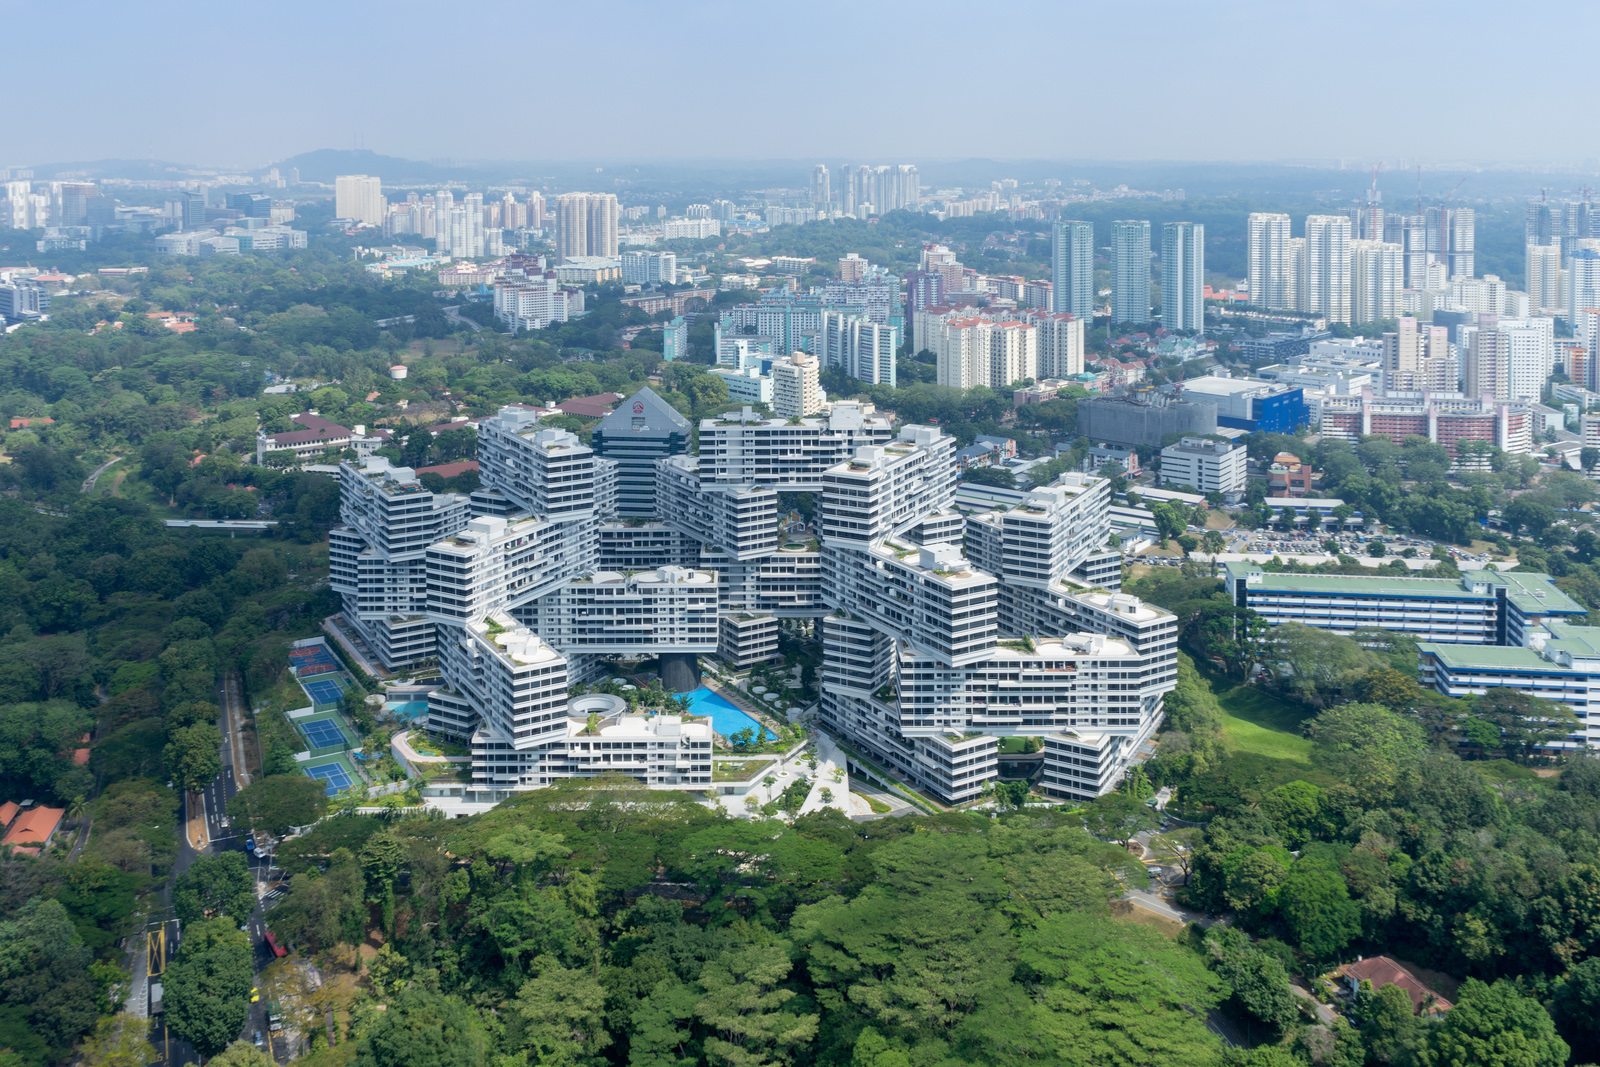 The Interlace Vertical Village Apartment Complex in Singapore